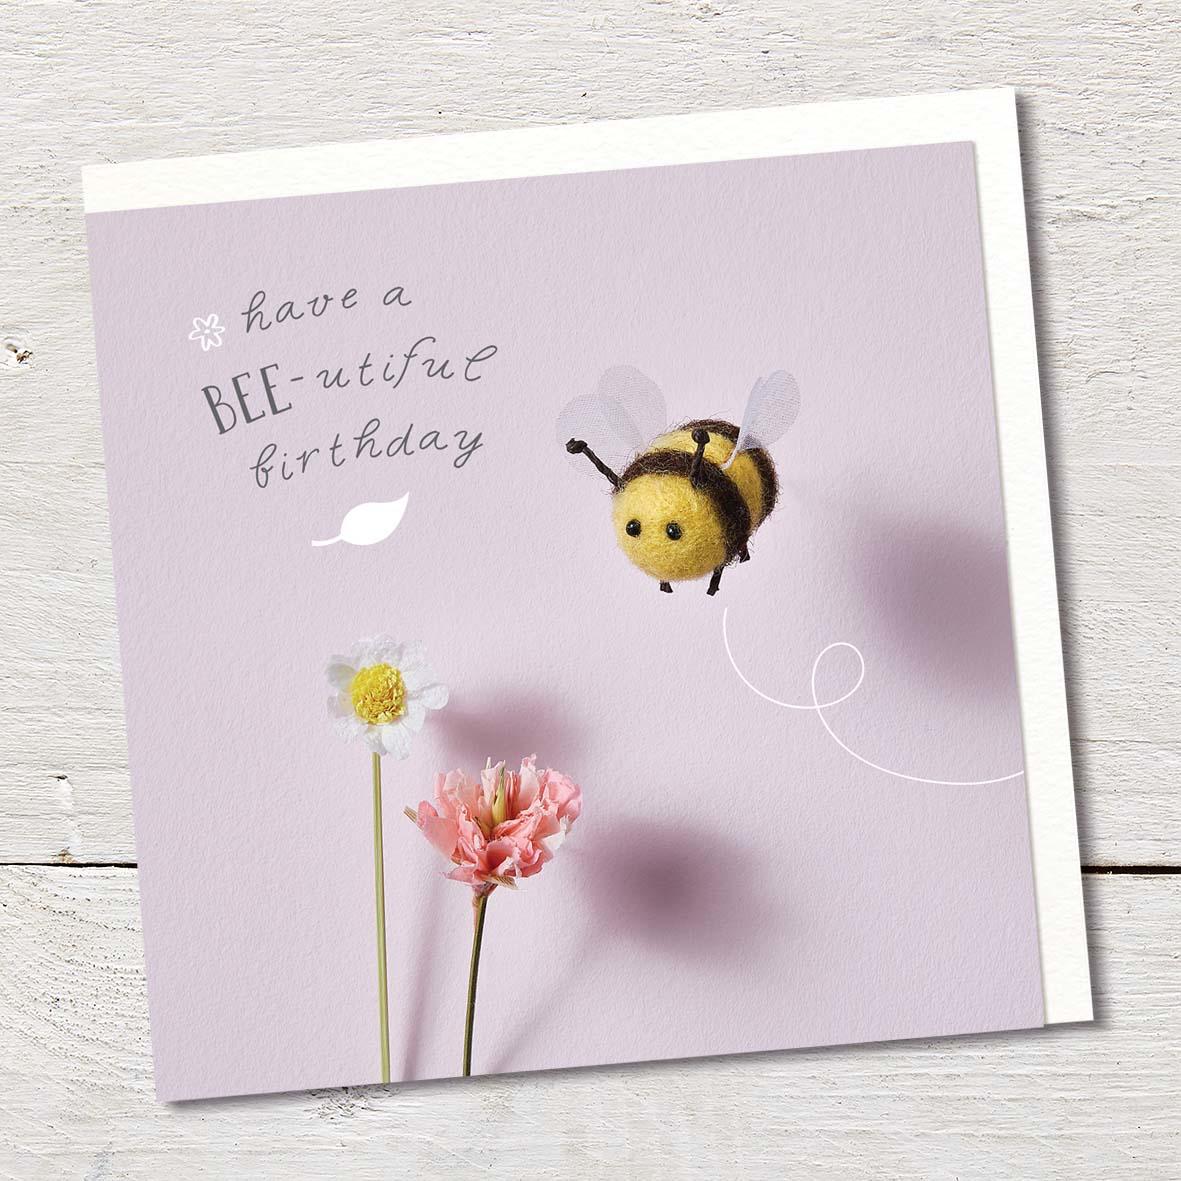 Card featuring a cute felted bumble bee and flowers.